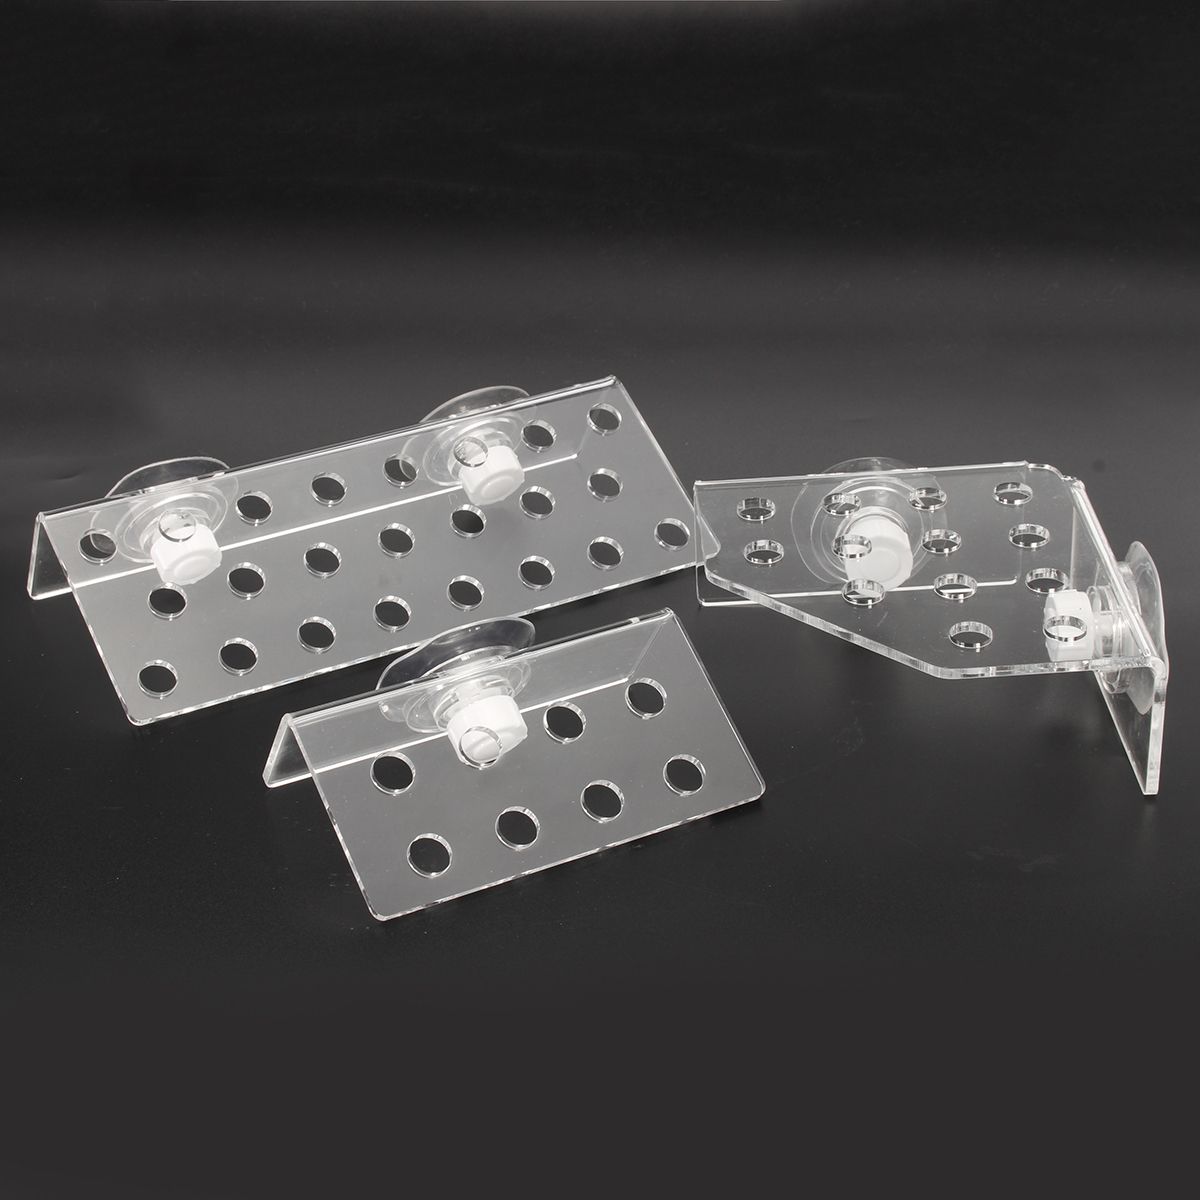 Acrylic-Aquarium-Coral-Frag-Plugs-Rack-Stand-Bracket-Holds-Live-Fish-Tank-Suction-Cup-1378420